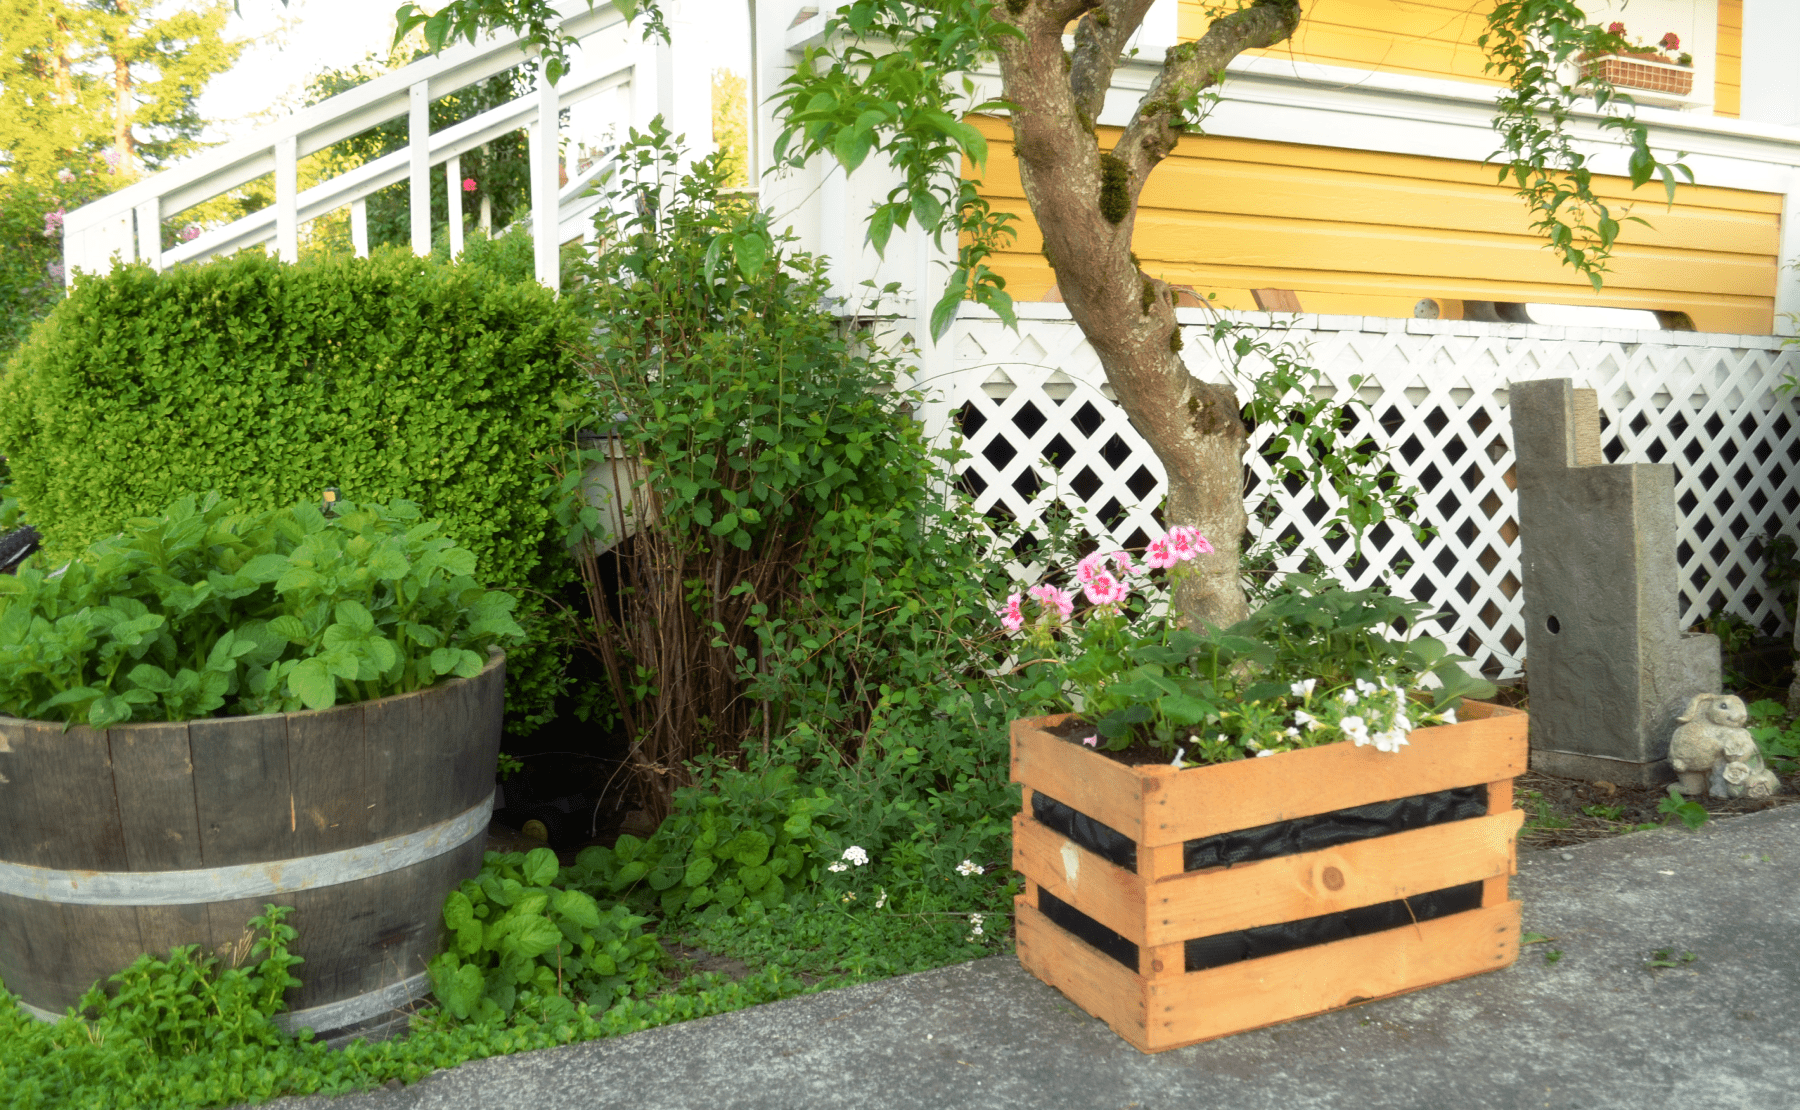 Crate box transfored into a plantar sits beneat a small tree and next to a half wine barrel plantar in front of latice trimed home